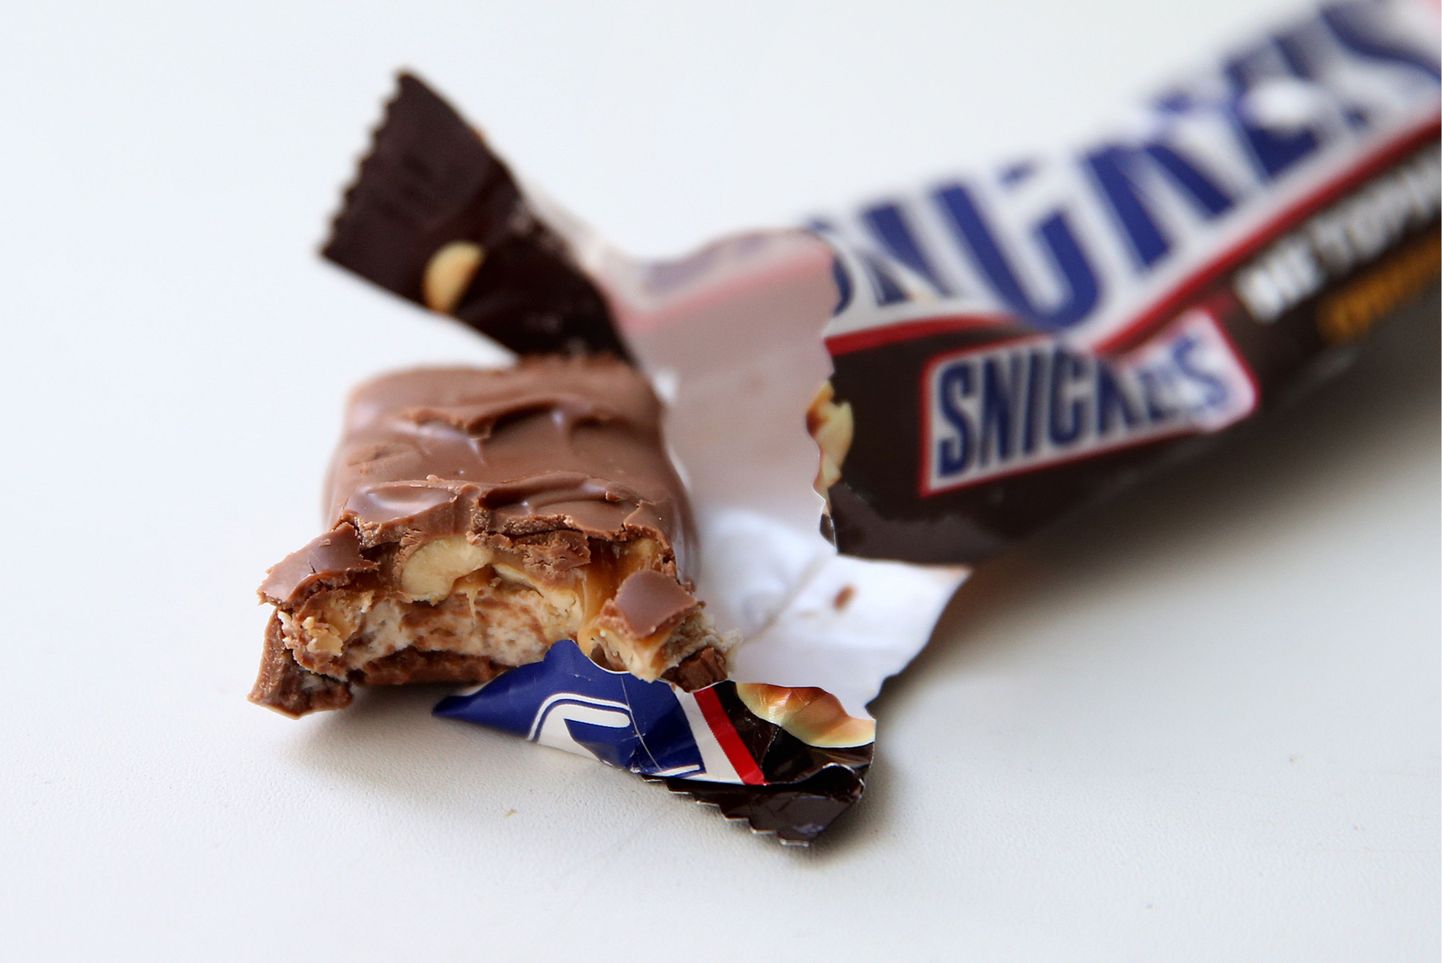 Snickers.